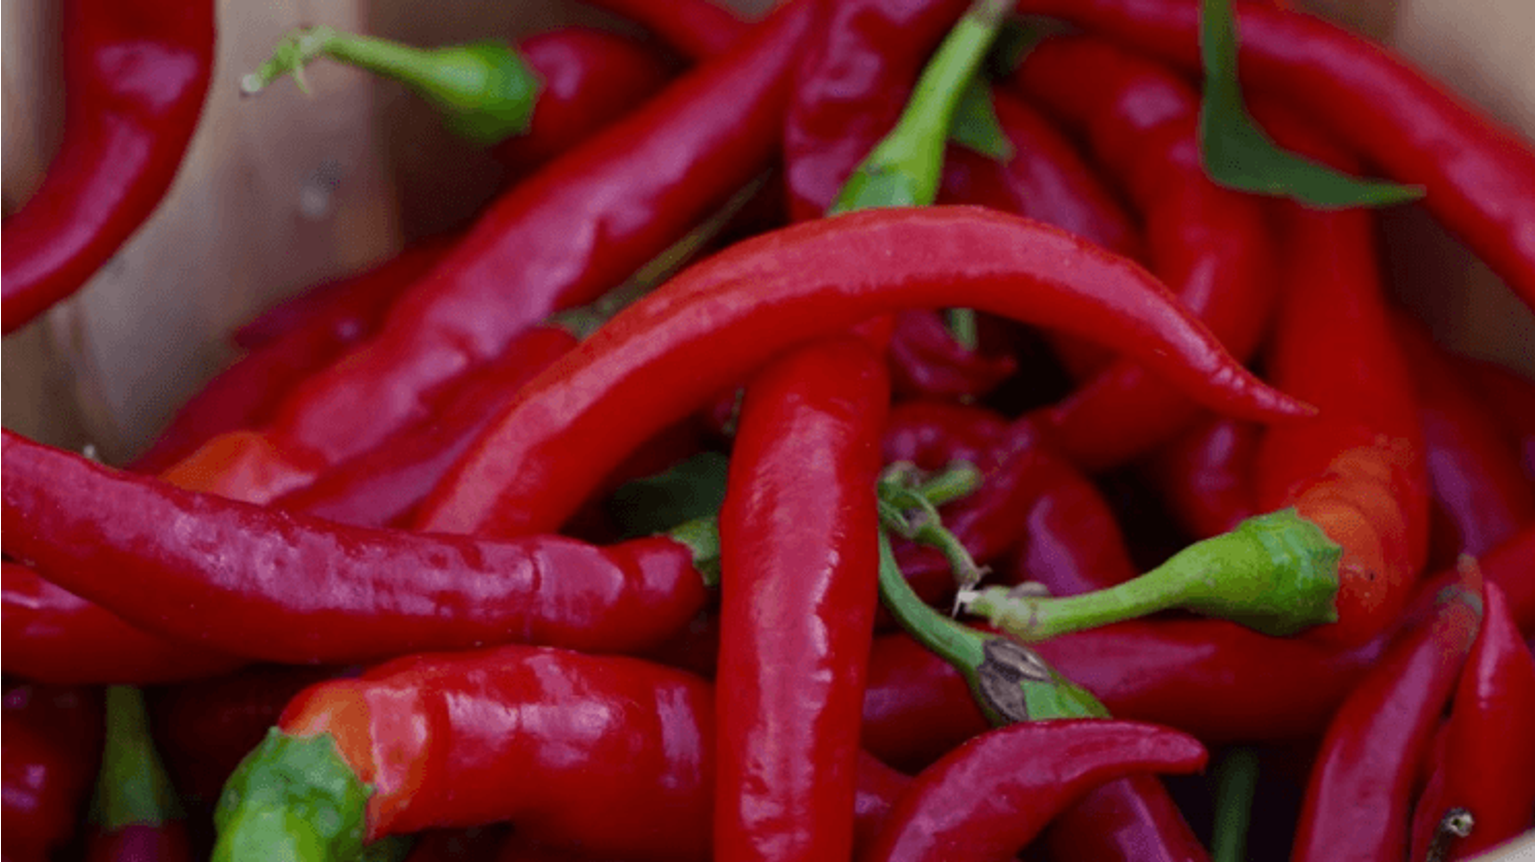 thumbnail for blog article named: Chilli & Beer – Spice up your life